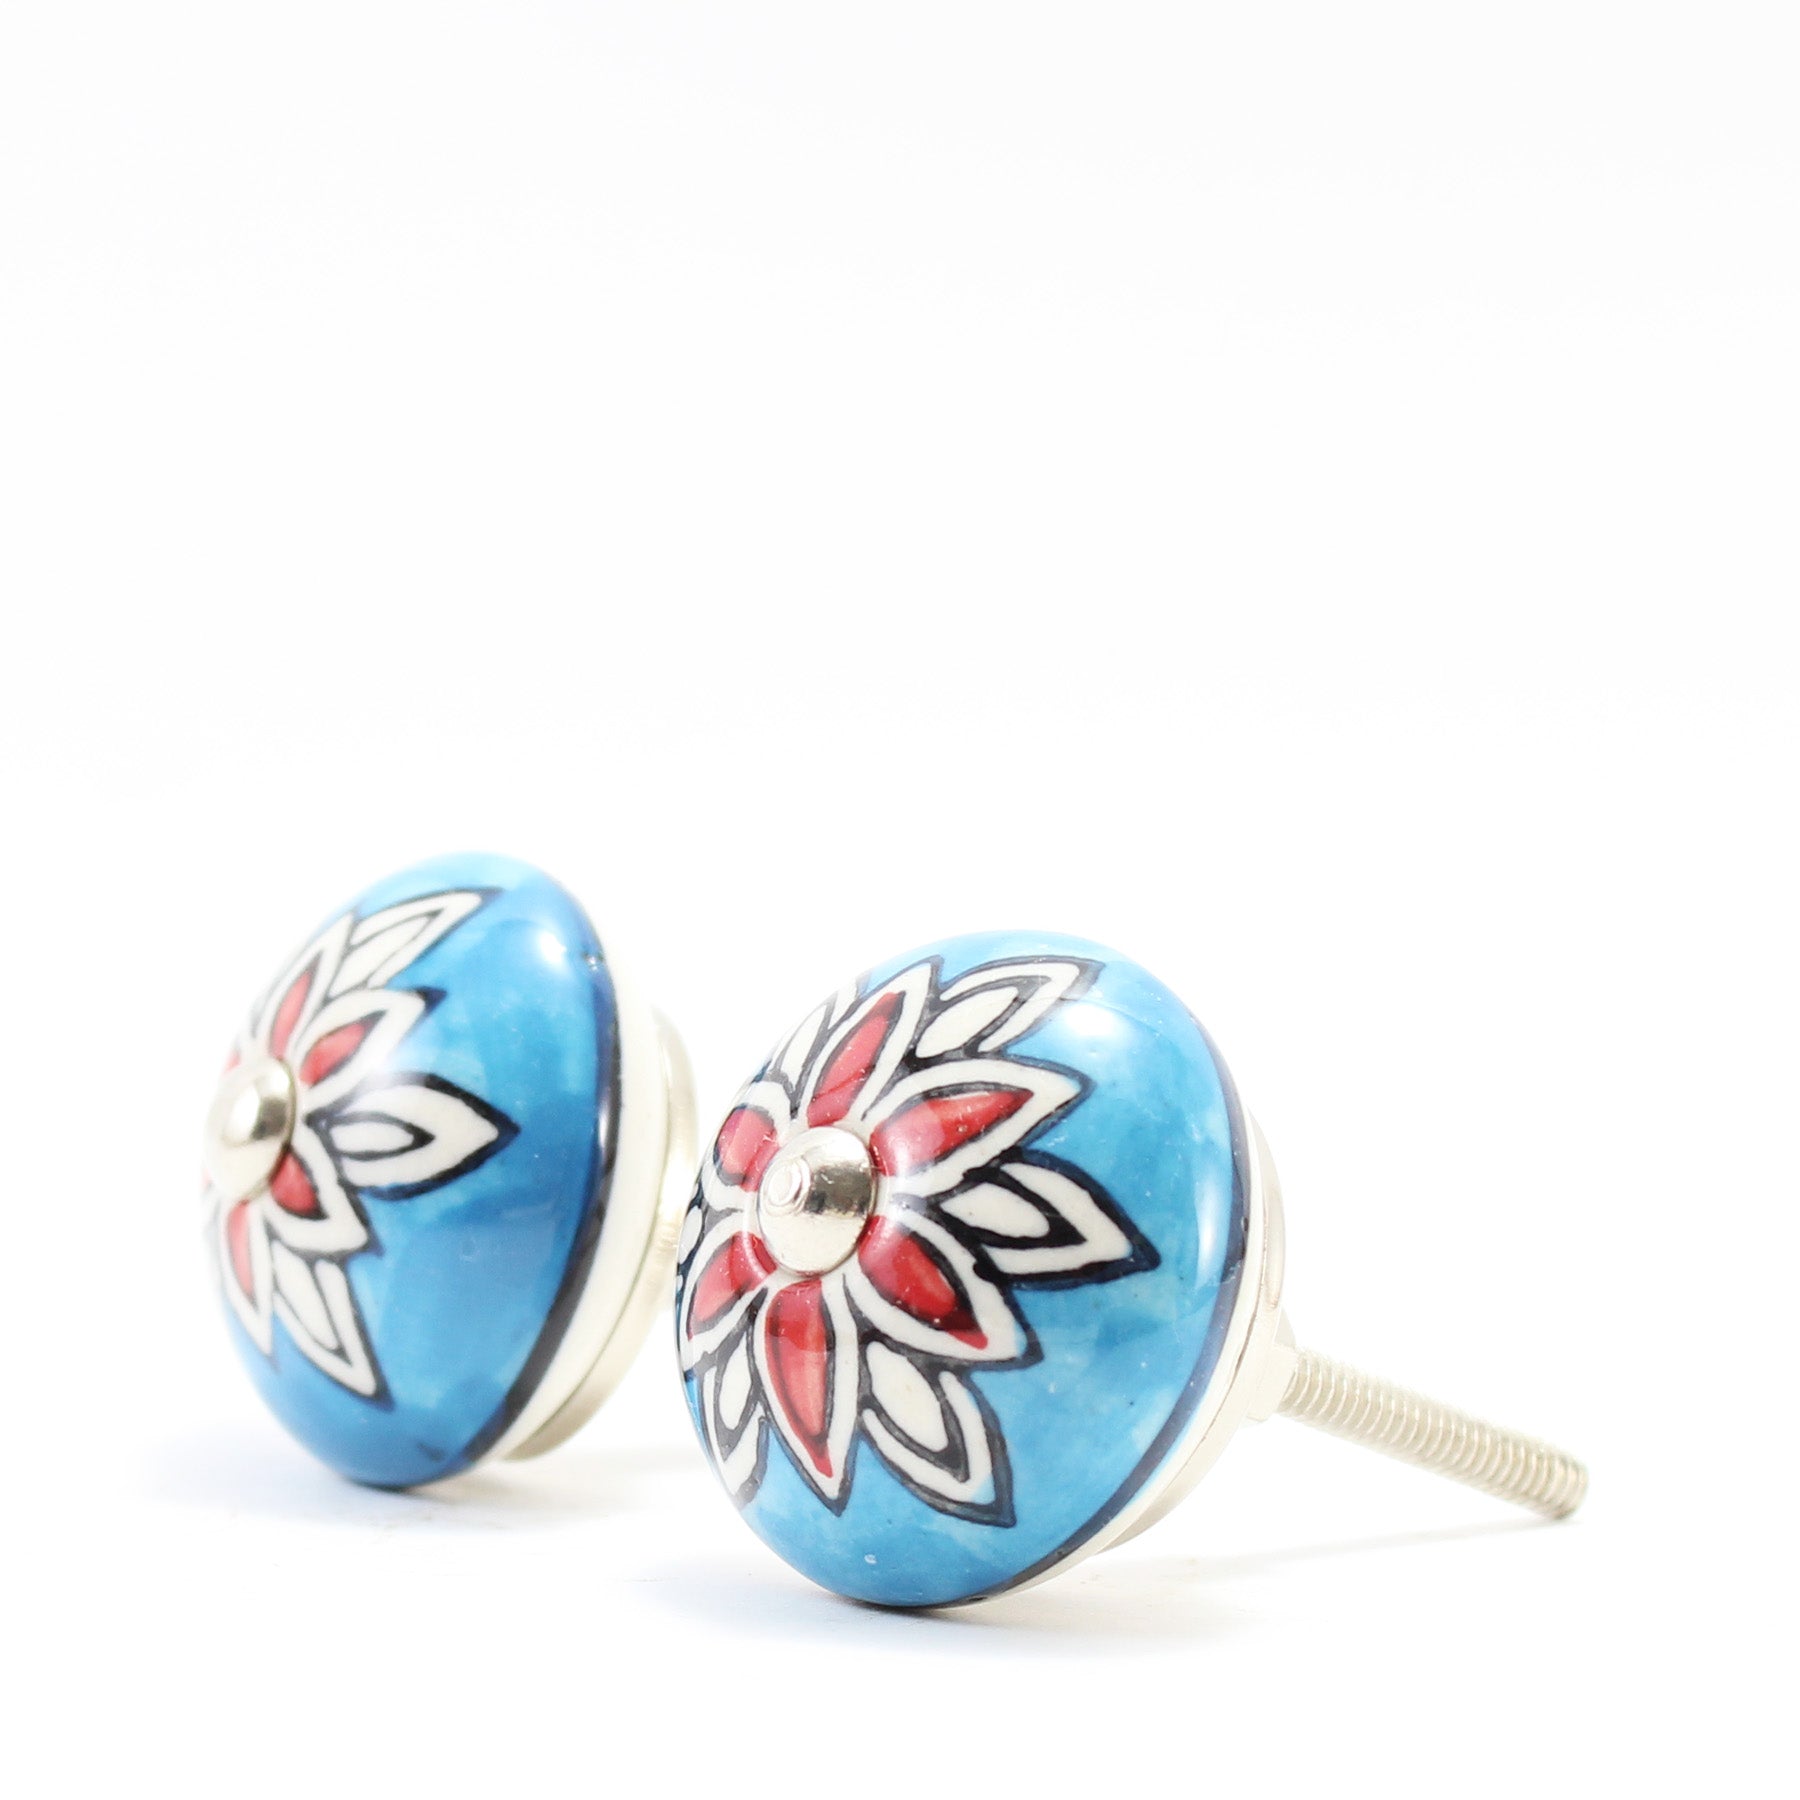 Hand Painted Ceramic Knobs XII